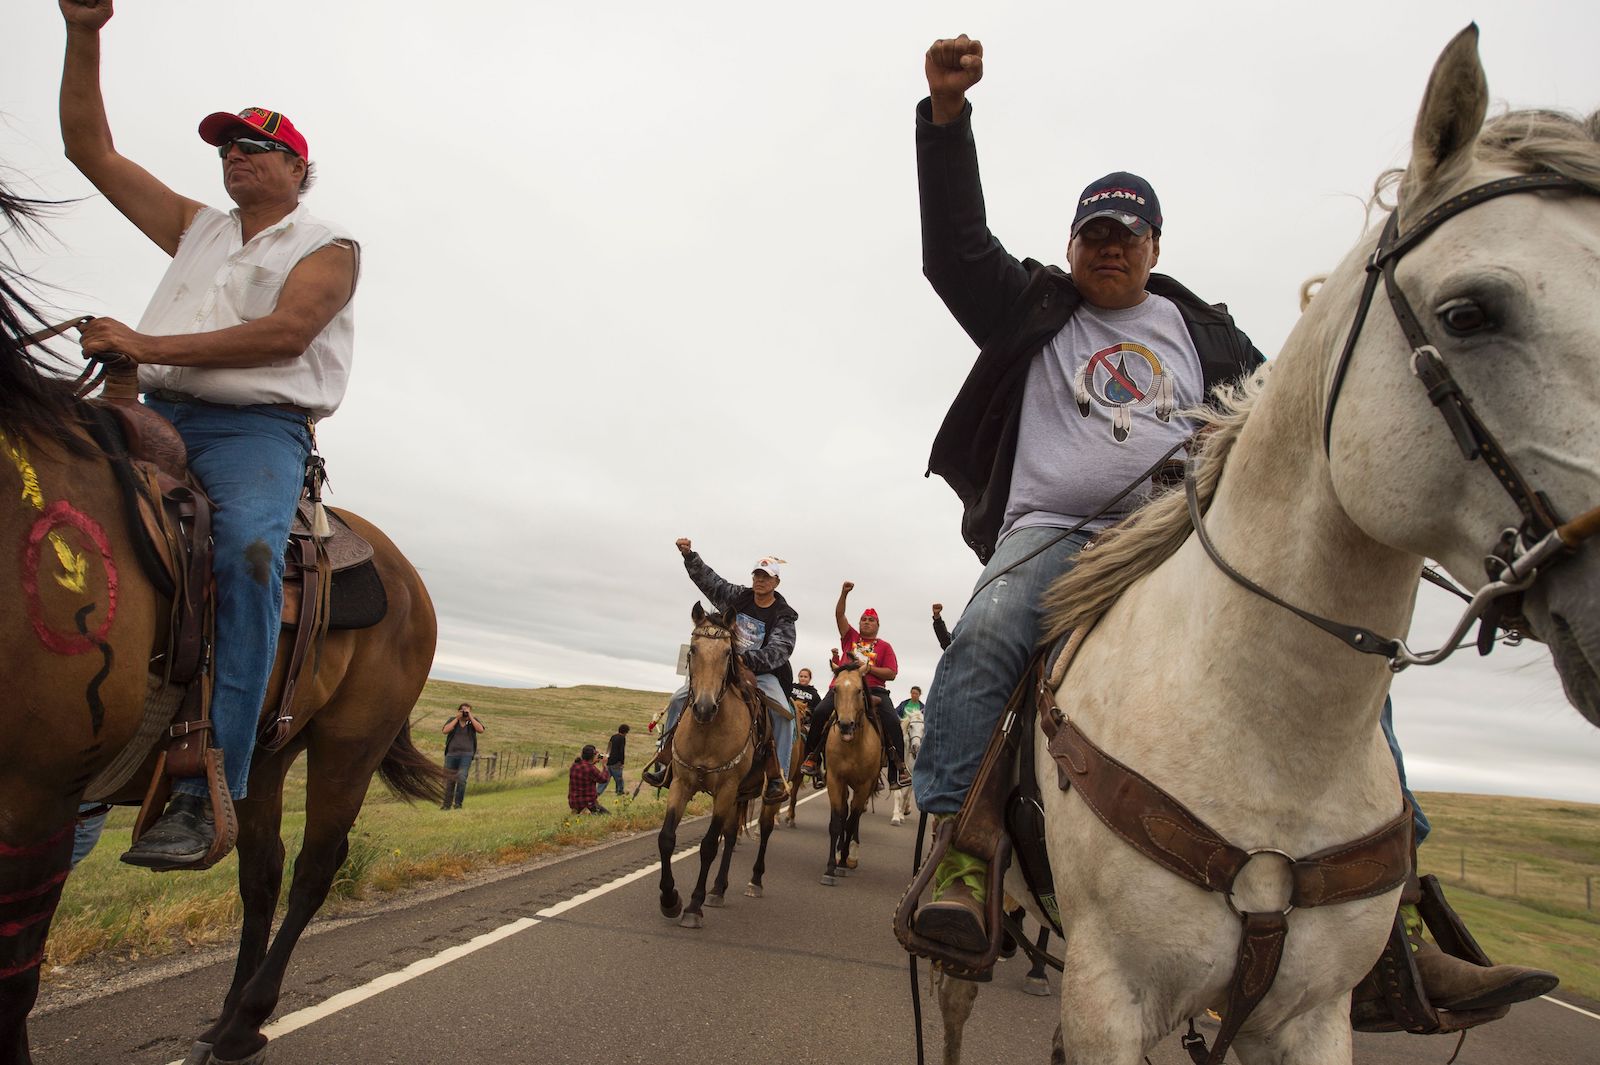 Indigenous activists on horseback raise their fists in protest